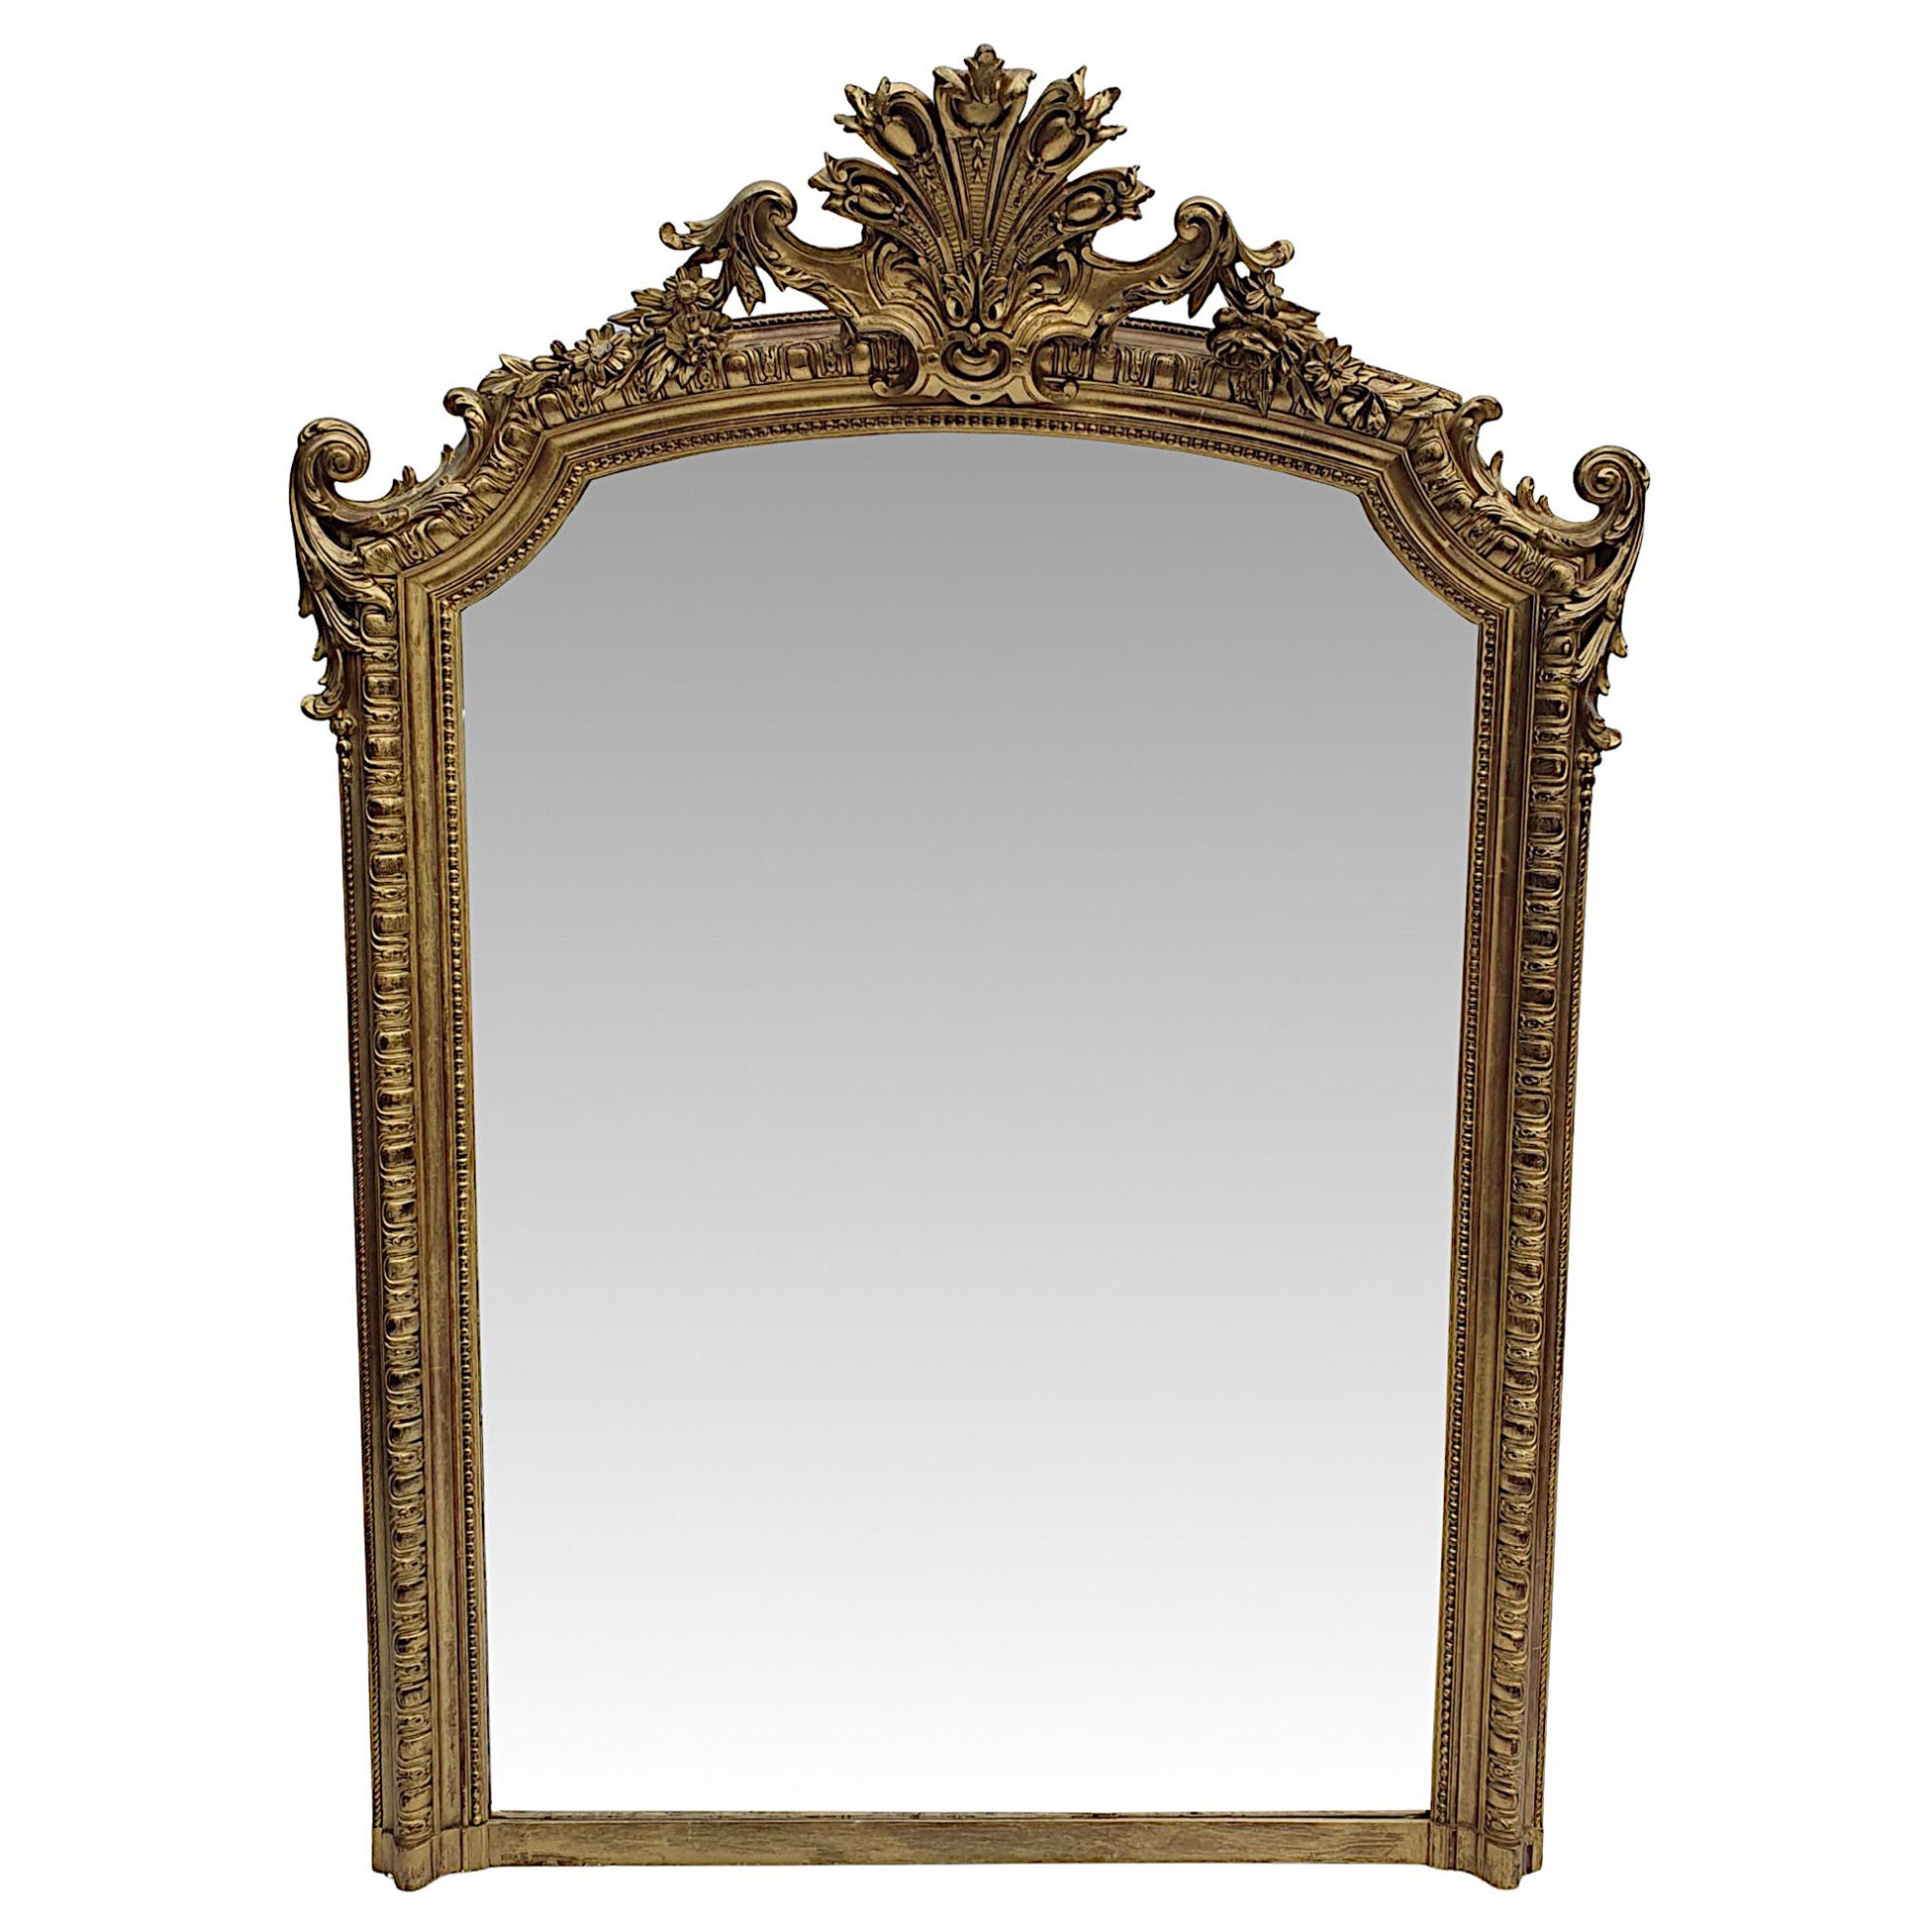 Superb 19th Century Giltwood Overmantle or Hall Mirror